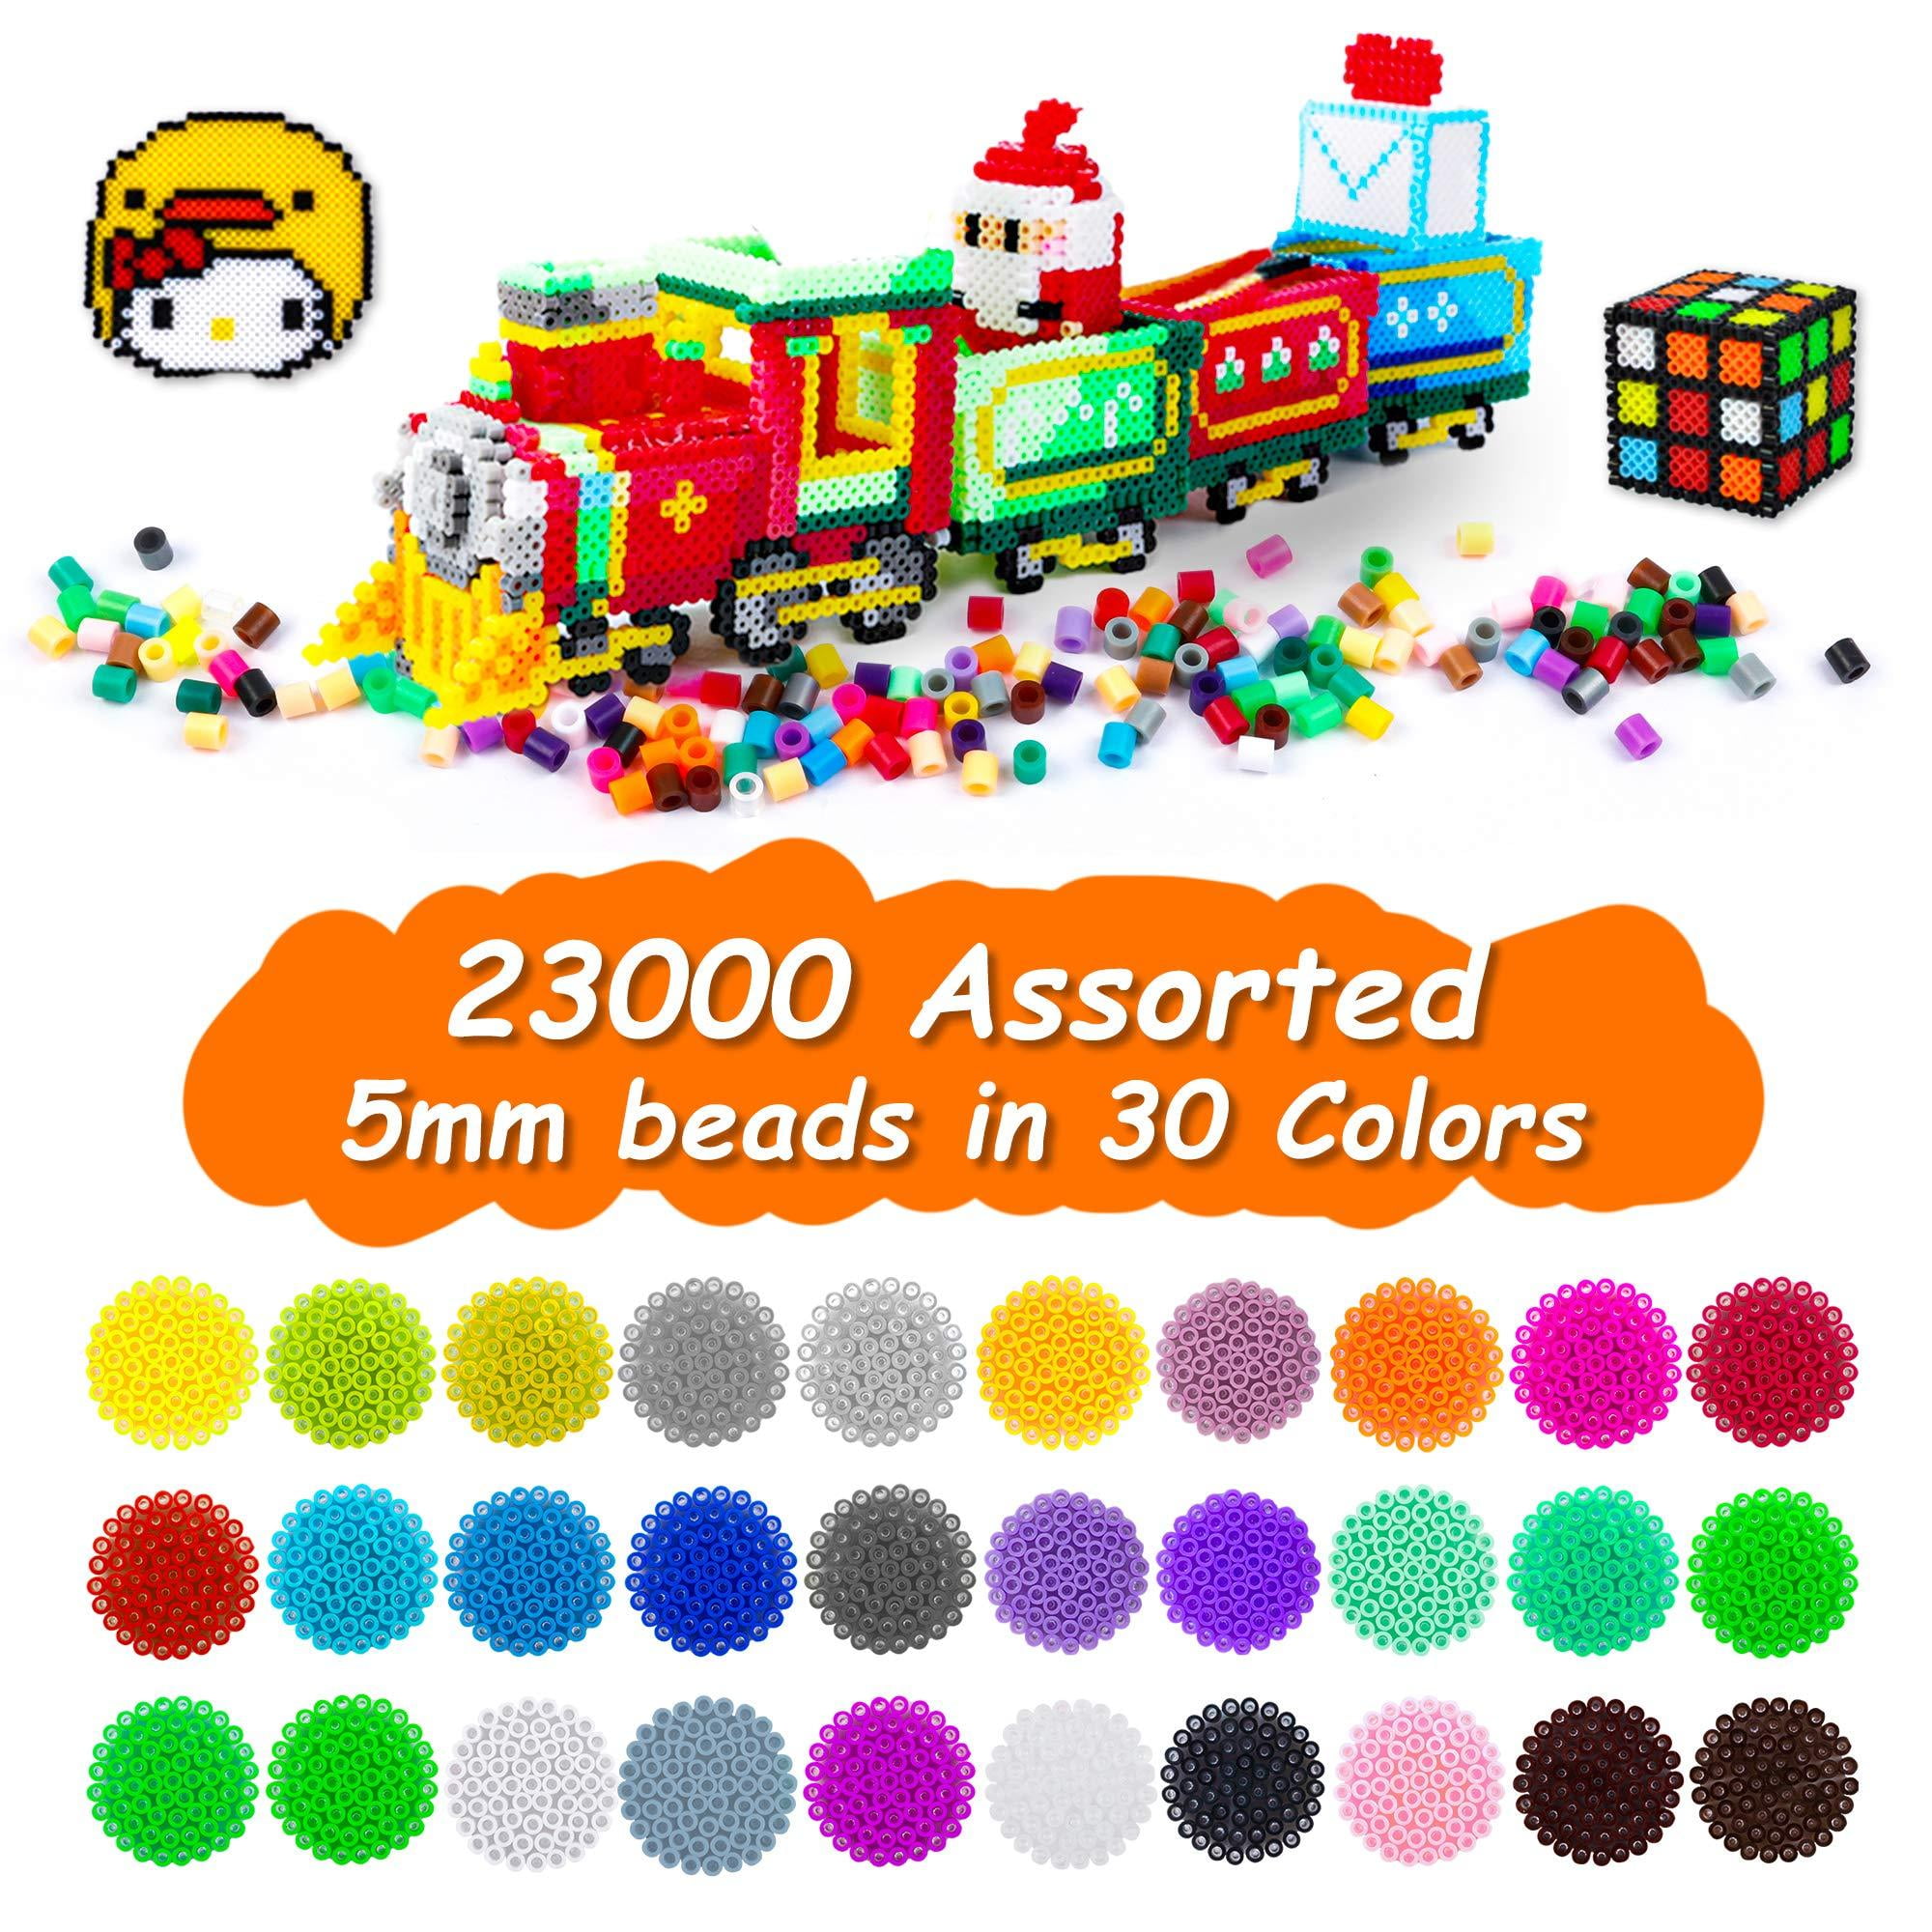 27,500 Pcs Fuse Beads Kit for Kids Crafts, 30 Colors Iron Beads Set with 3 Pegboards, 5 Ironing Paper, 10 Patterns, Gifts for Birthday Christmas